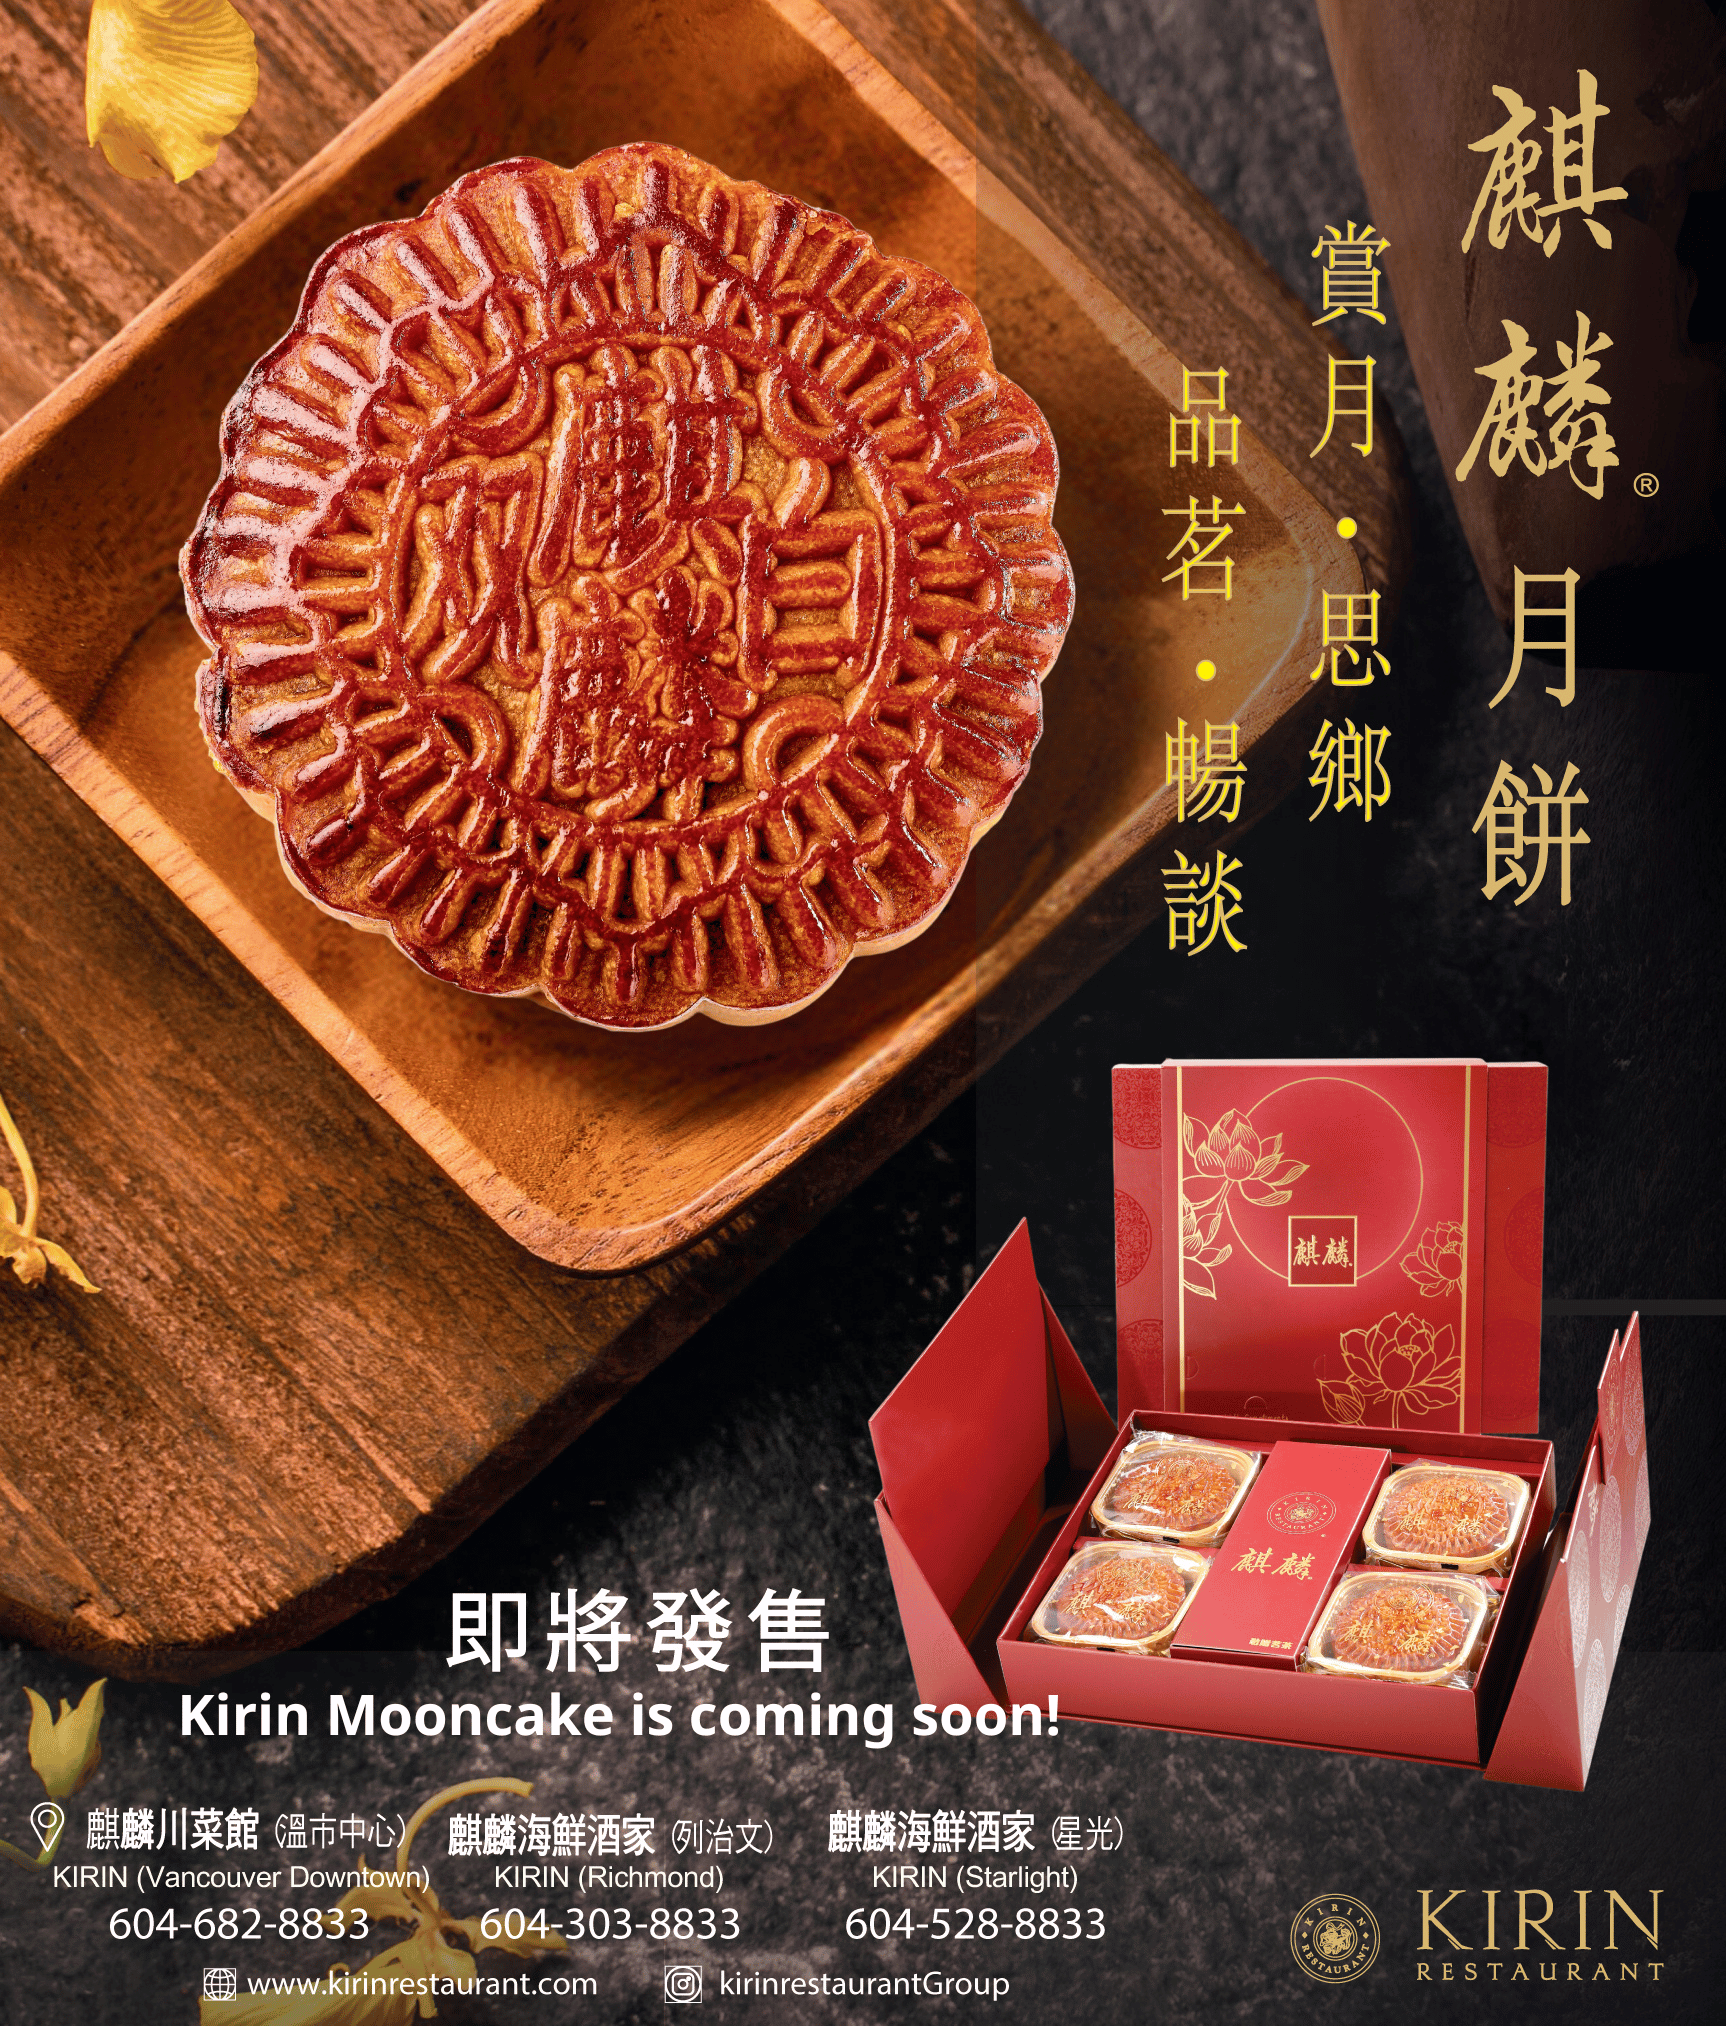 Indulge in the rich tradition of the Mid-Autumn Festival with Kirin Restaurant's exquisite mooncakes. Our mooncakes are crafted to perfection, featuring a golden, flaky crust and a luscious filling that embodies the essence of the festival. Celebrate the season with our premium mooncakes, presented in an elegant red box adorned with beautiful lotus motifs, perfect for gifting to loved ones. Available at all Kirin locations in Vancouver, Richmond, and Starlight. Order now and experience the true taste of heritage and festivity.Contact us:Kirin (Vancouver Downtown): 604-682-8833Kirin (Richmond): 604-303-8833Kirin (Starlight): 604-528-8833Visit our website: kirinrestaurant.com 